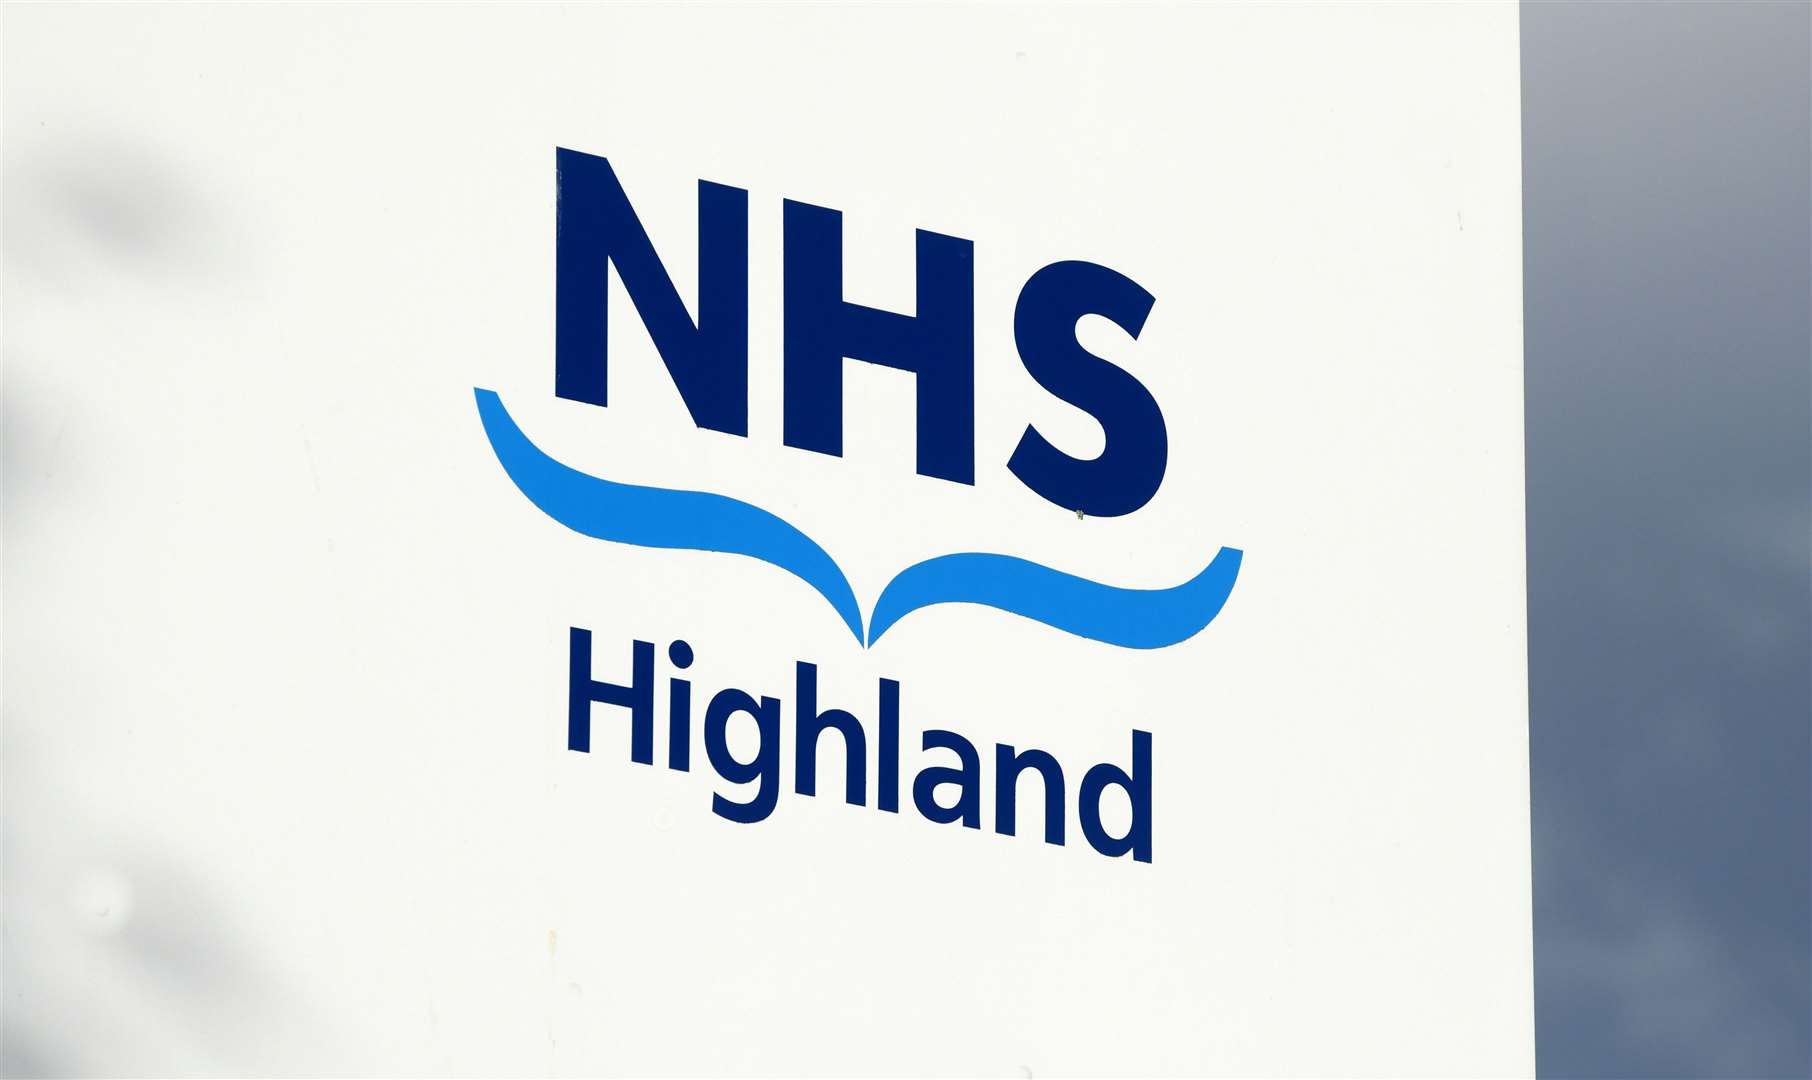 NHS Highland says it looks forward to continued dialogue with GPs.